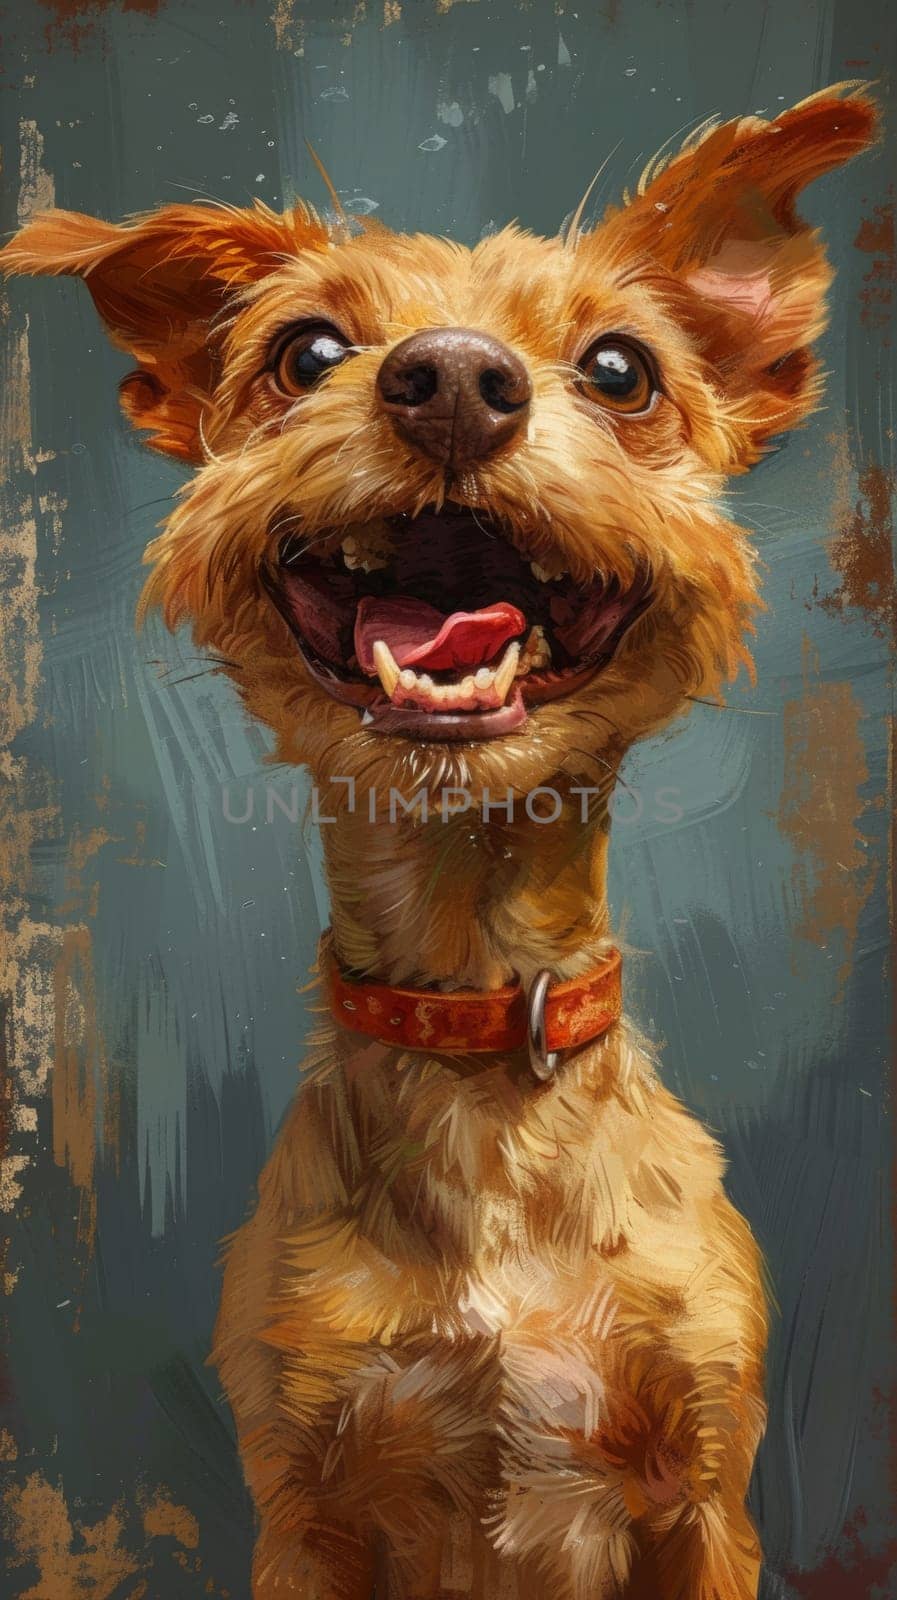 A painting of a small dog with its mouth open and tongue out